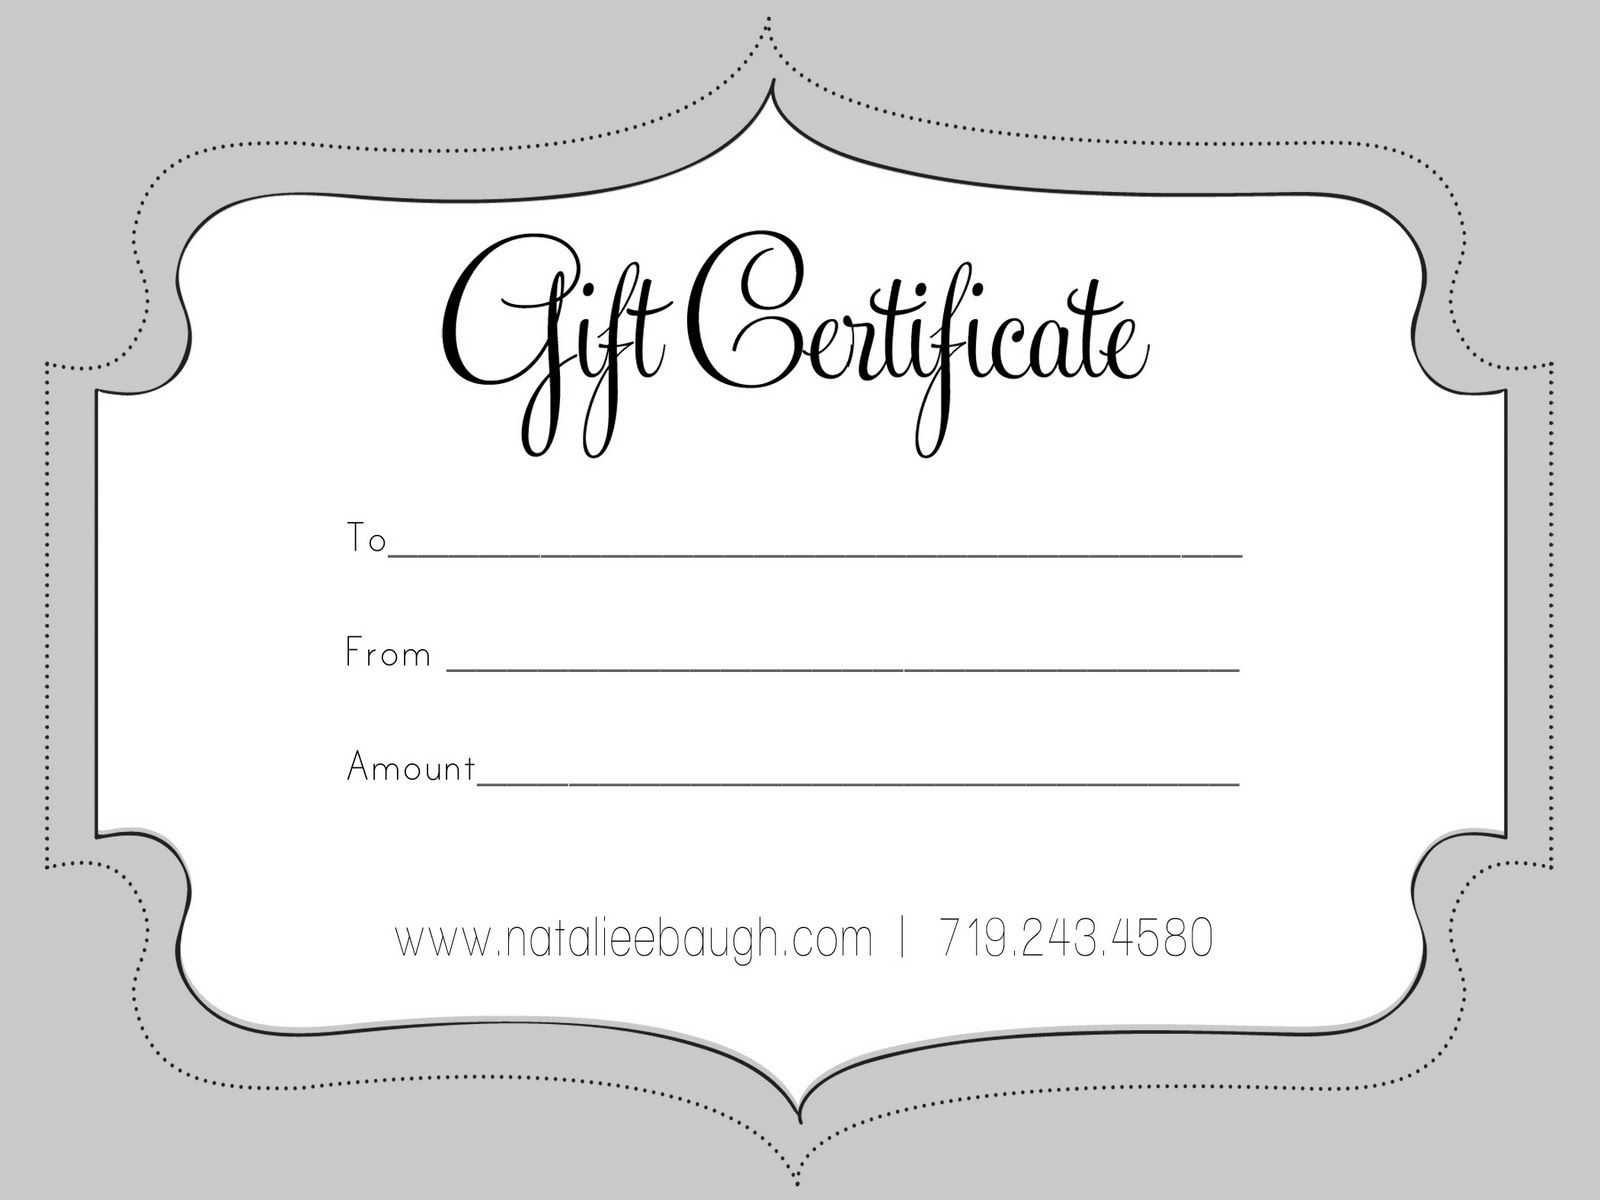 004 Gift Registry Card Template Free Rare Ideas Design With Regard To Dinner Certificate Template Free